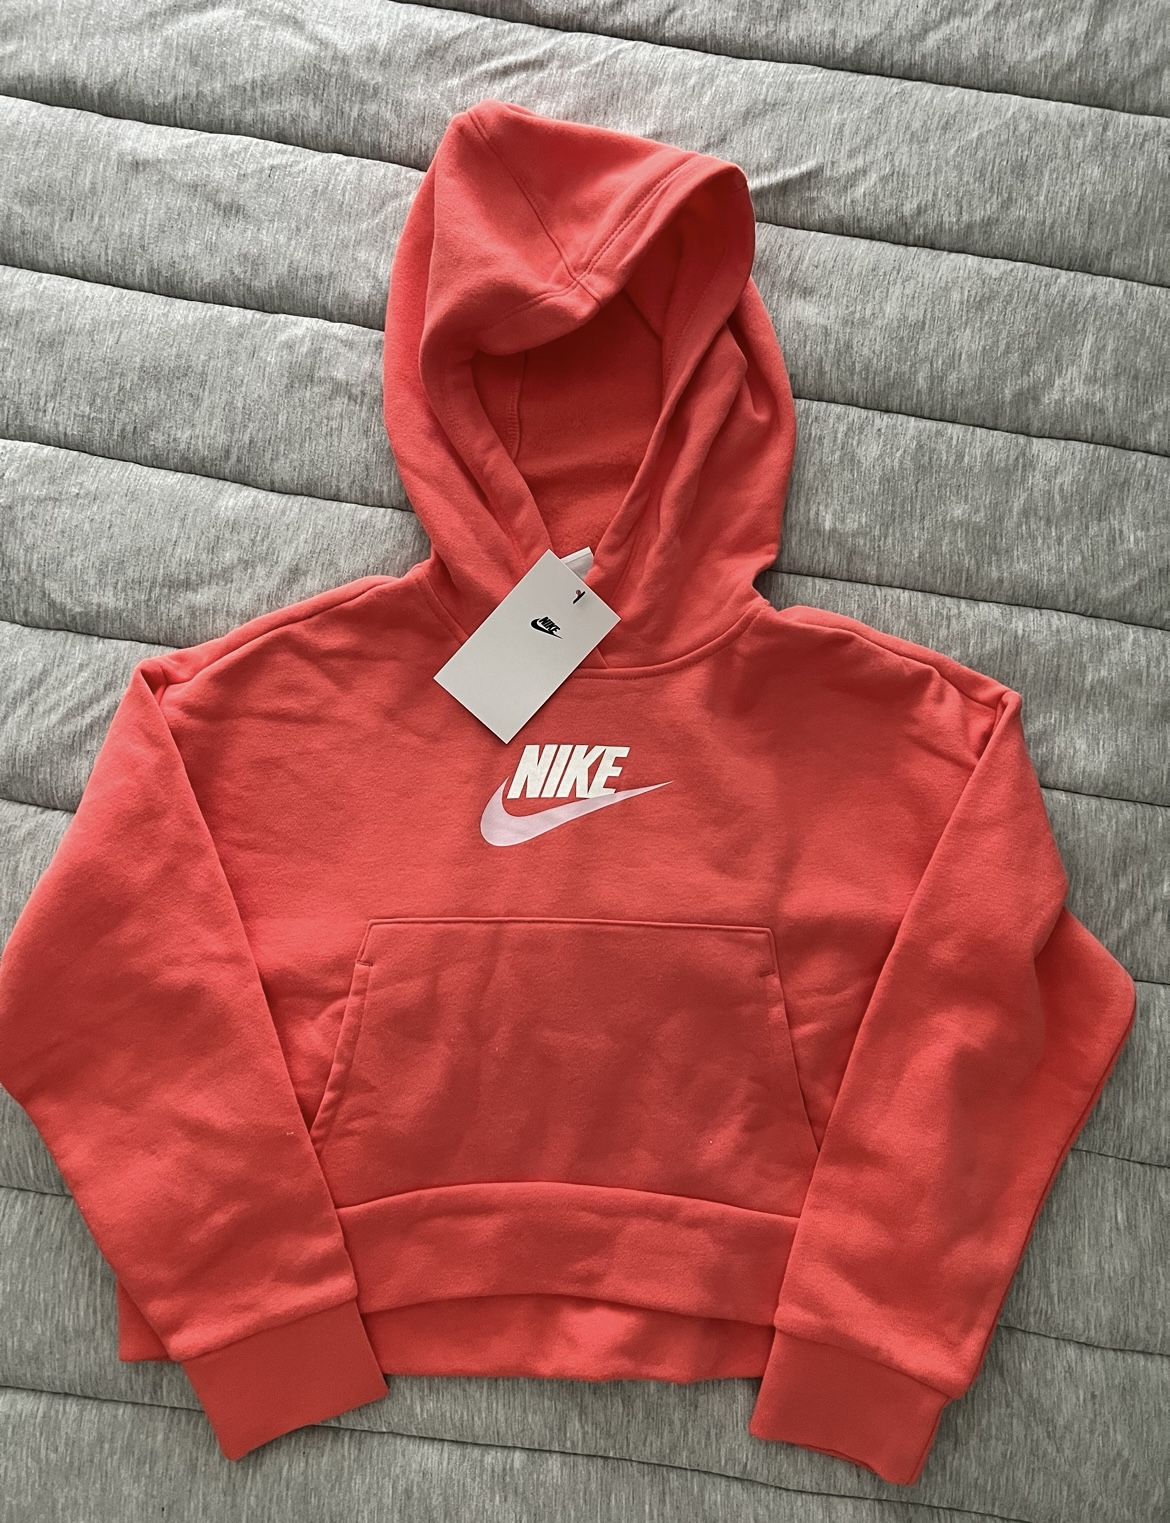 Nike Hoodie, New W/Tags, Pink, Girls Small